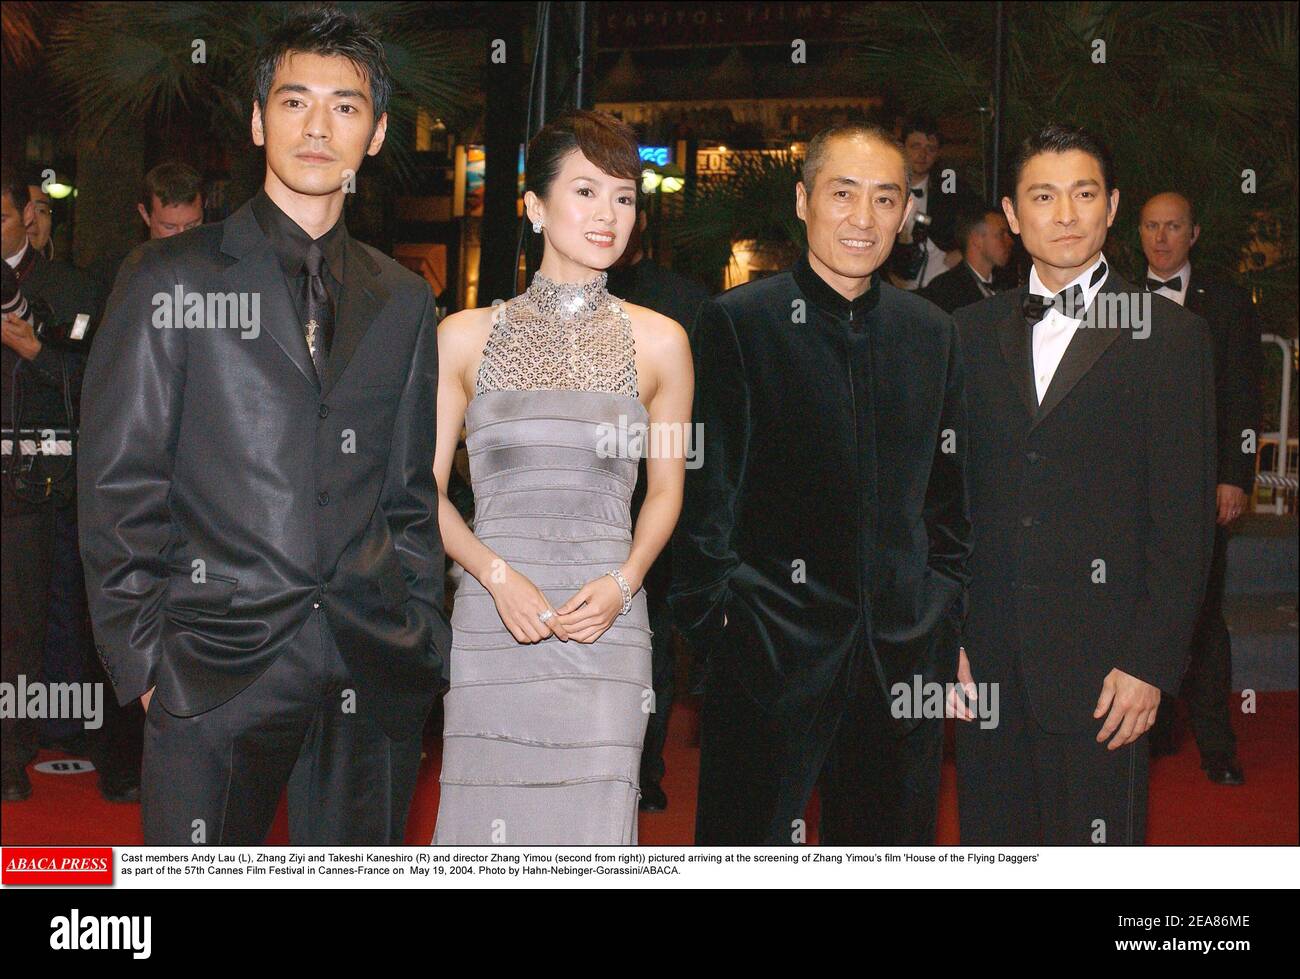 Cast members Andy Lau (L), Zhang Ziyi and Takeshi Kaneshiro (R) and director Zhang Yimou (second from right)) pictured arriving at the screening of Zhang Yimou's film 'House of the Flying Daggers' as part of the 57th Cannes Film Festival in Cannes-France on May 19, 2004. Photo by Hahn-Nebinger-Gorassini/ABACA. Stock Photo